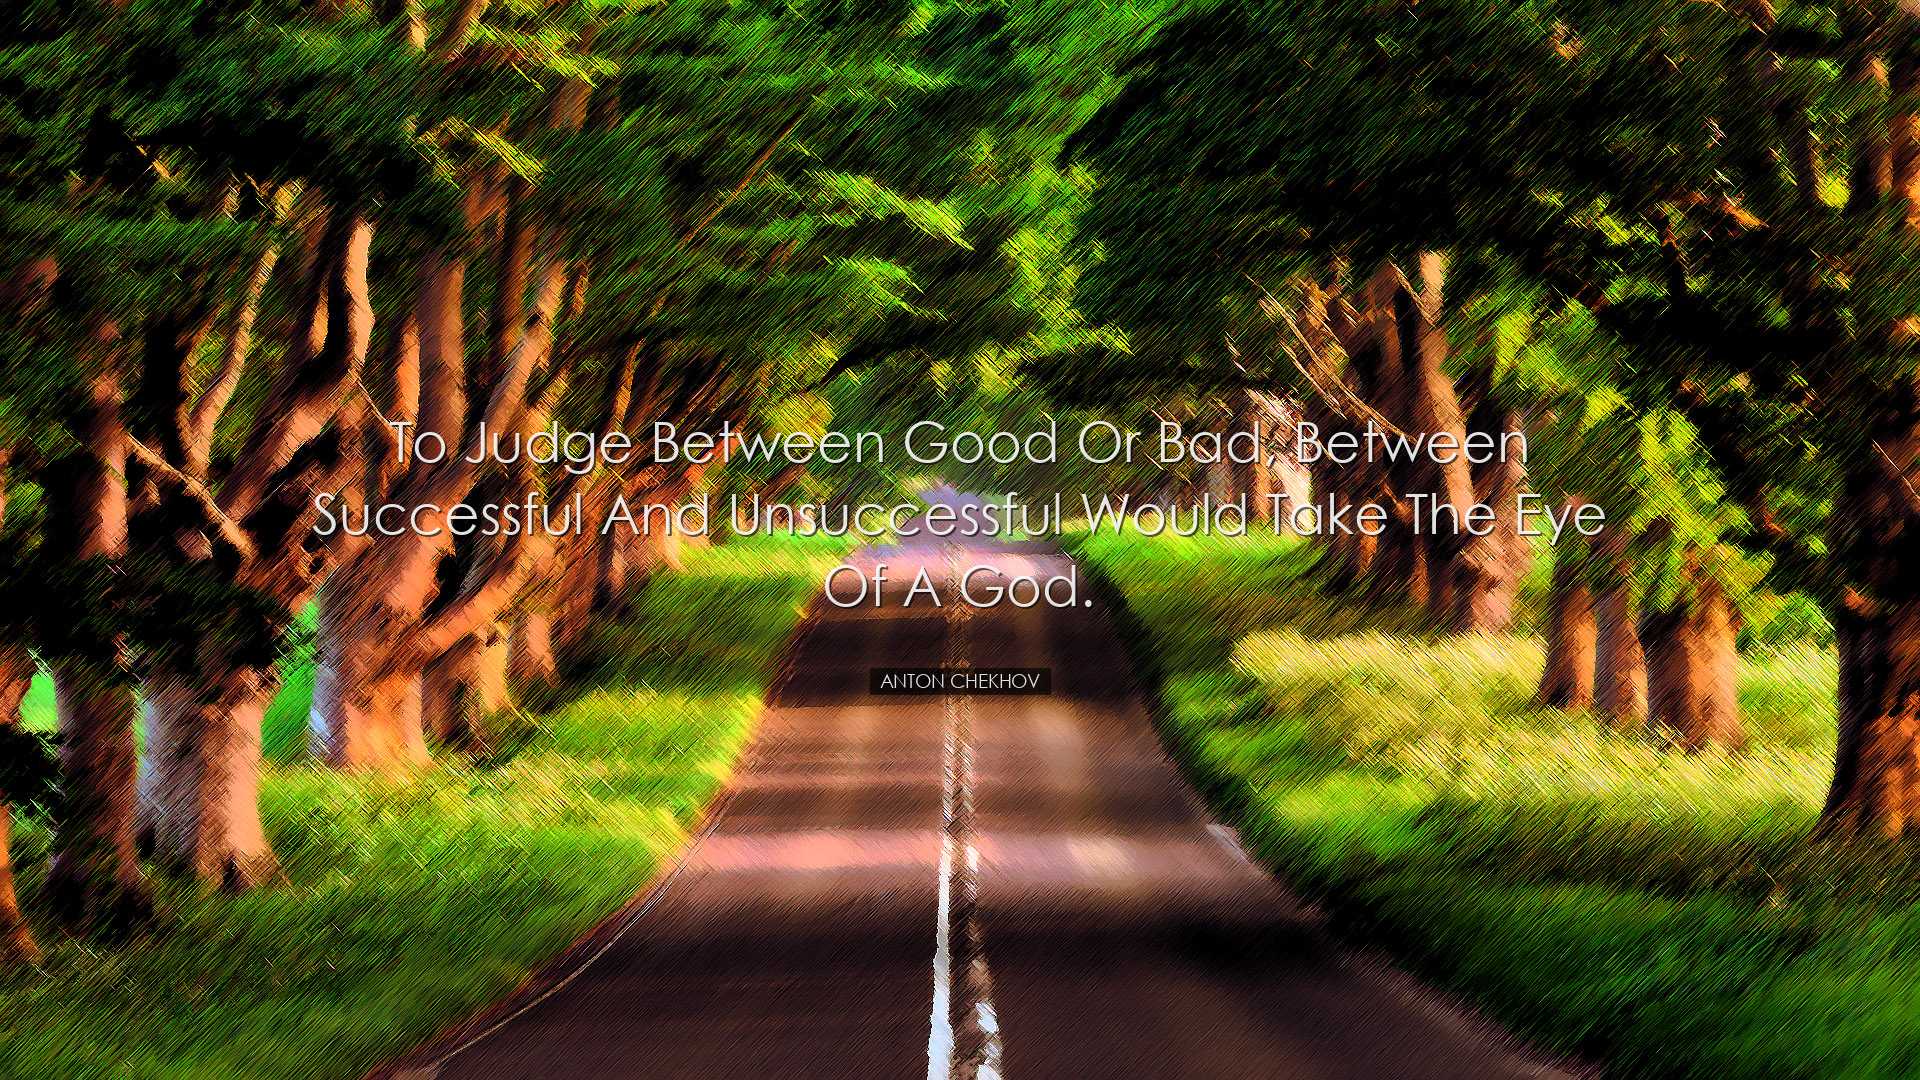 To judge between good or bad, between successful and unsuccessful